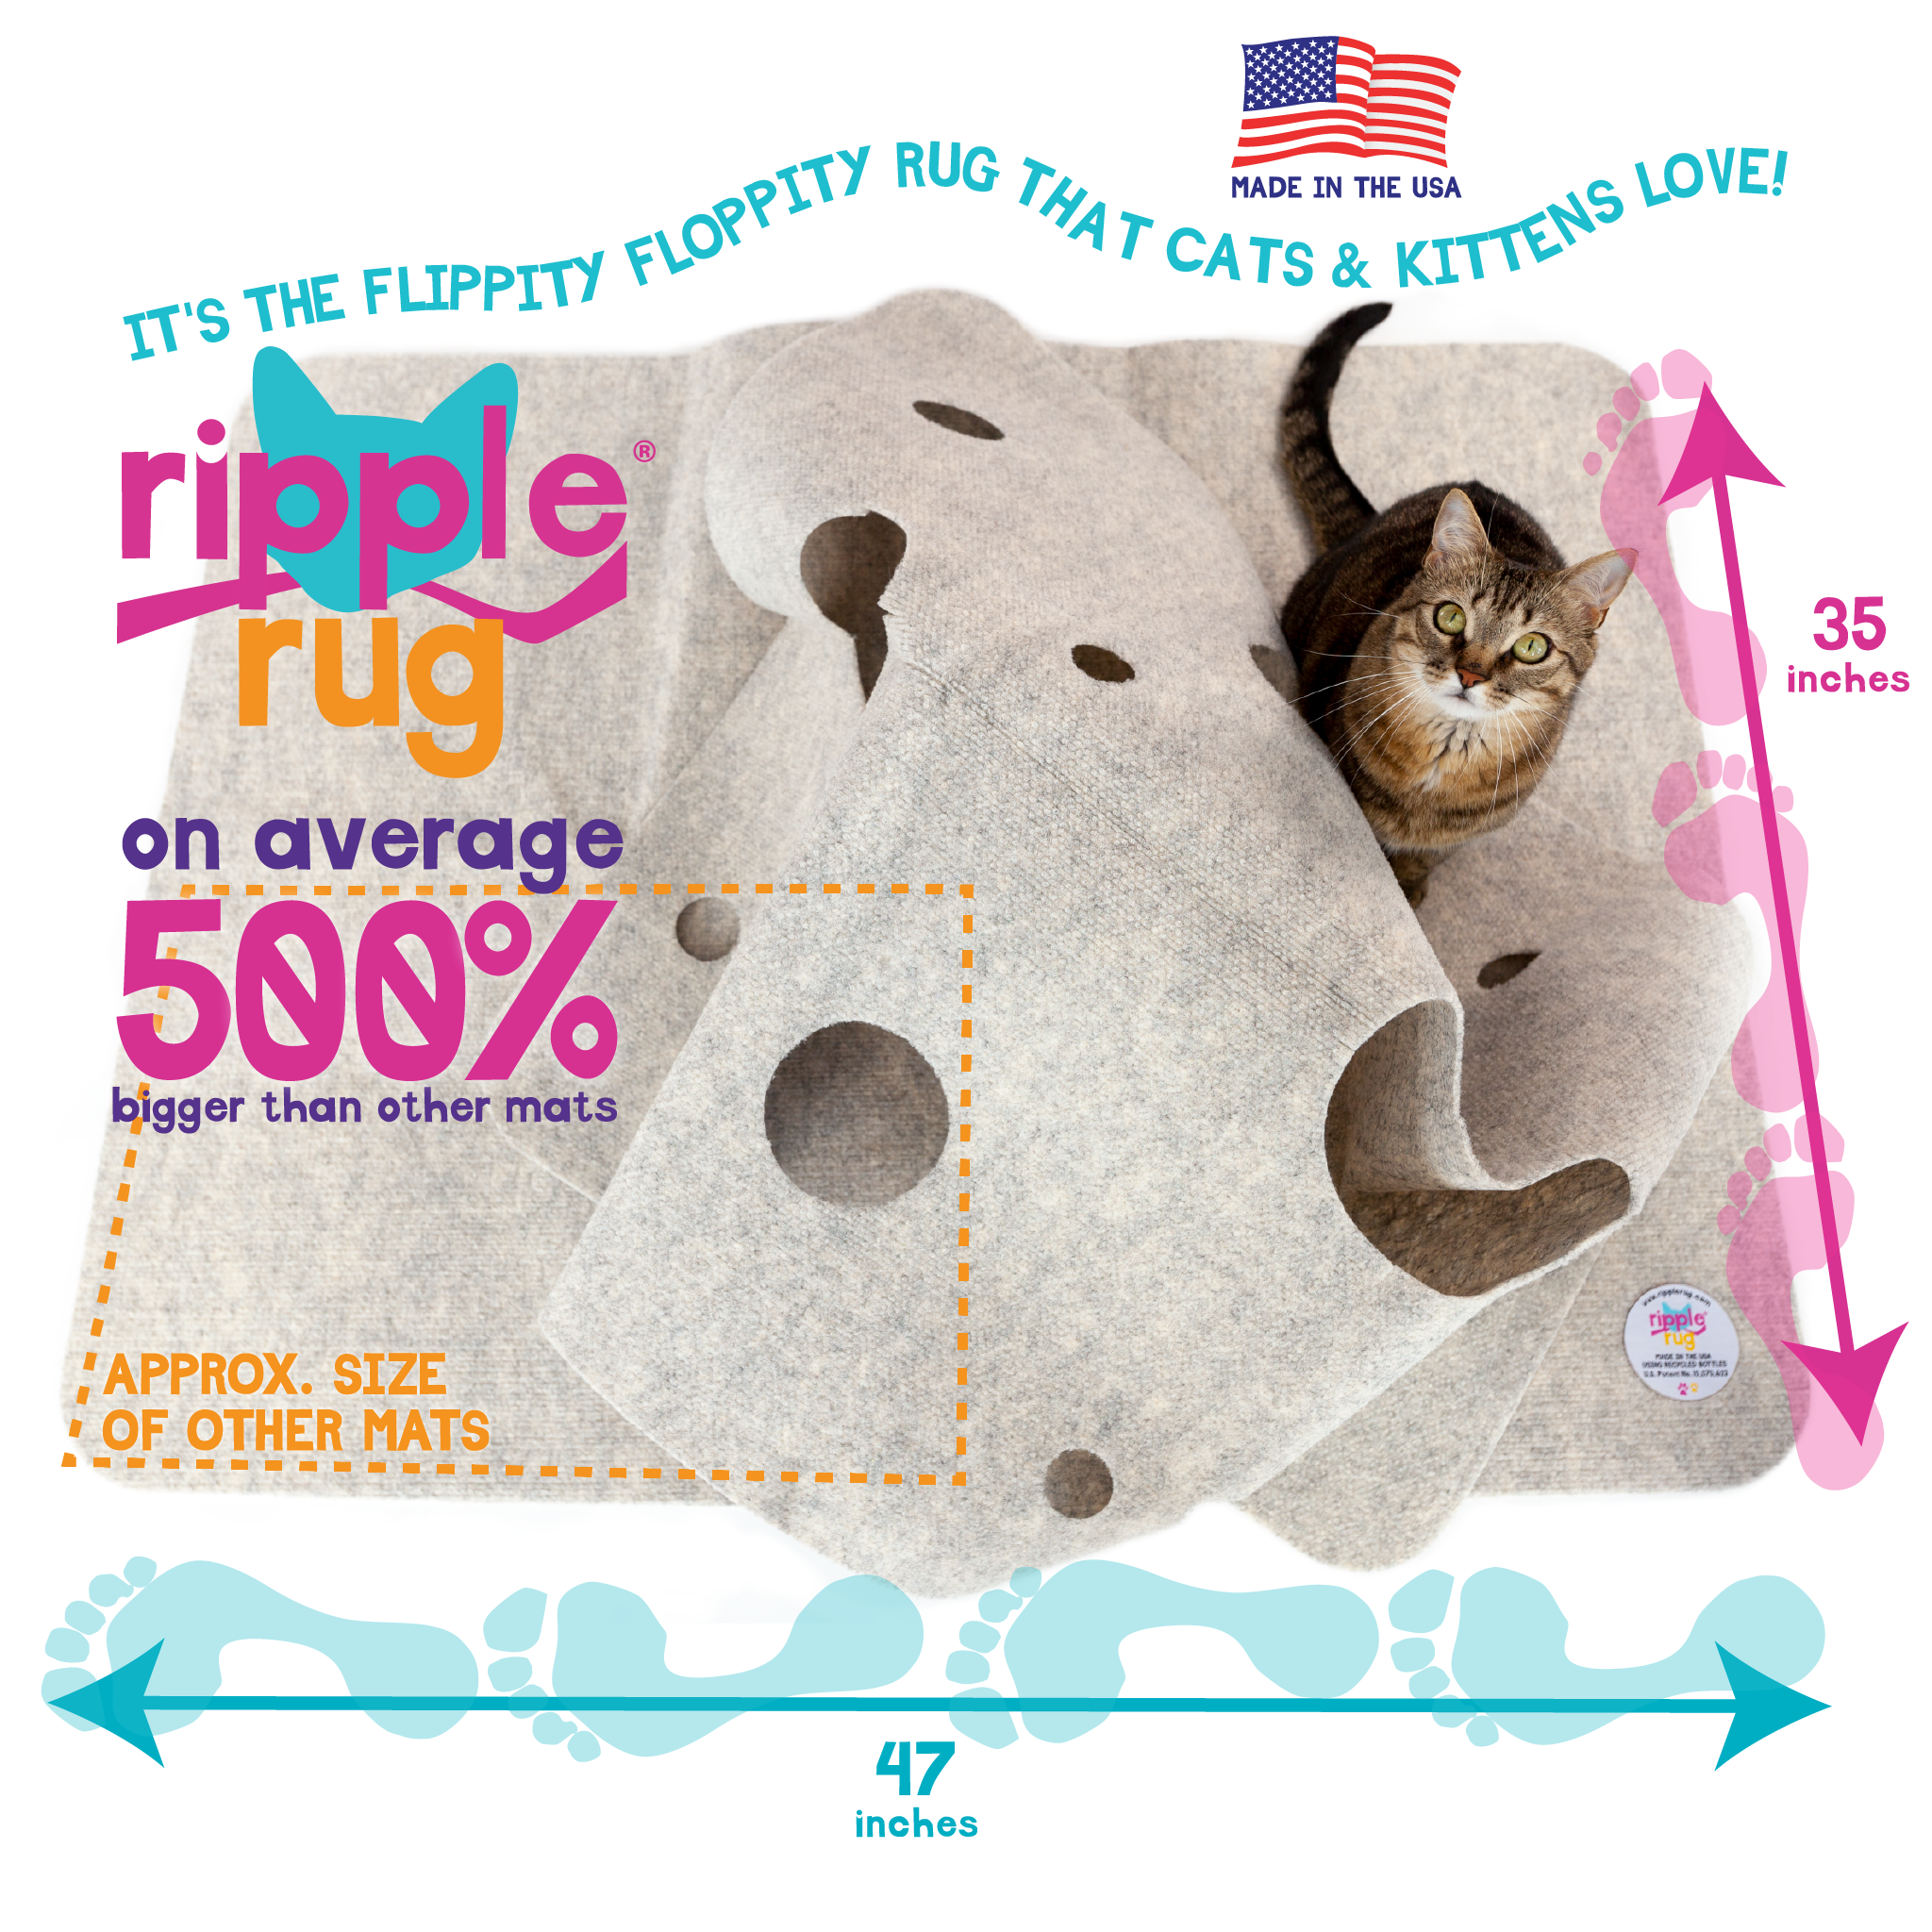 Keep Kitty Occupied This Holiday with the Ripple Rug Cat Activity Mat